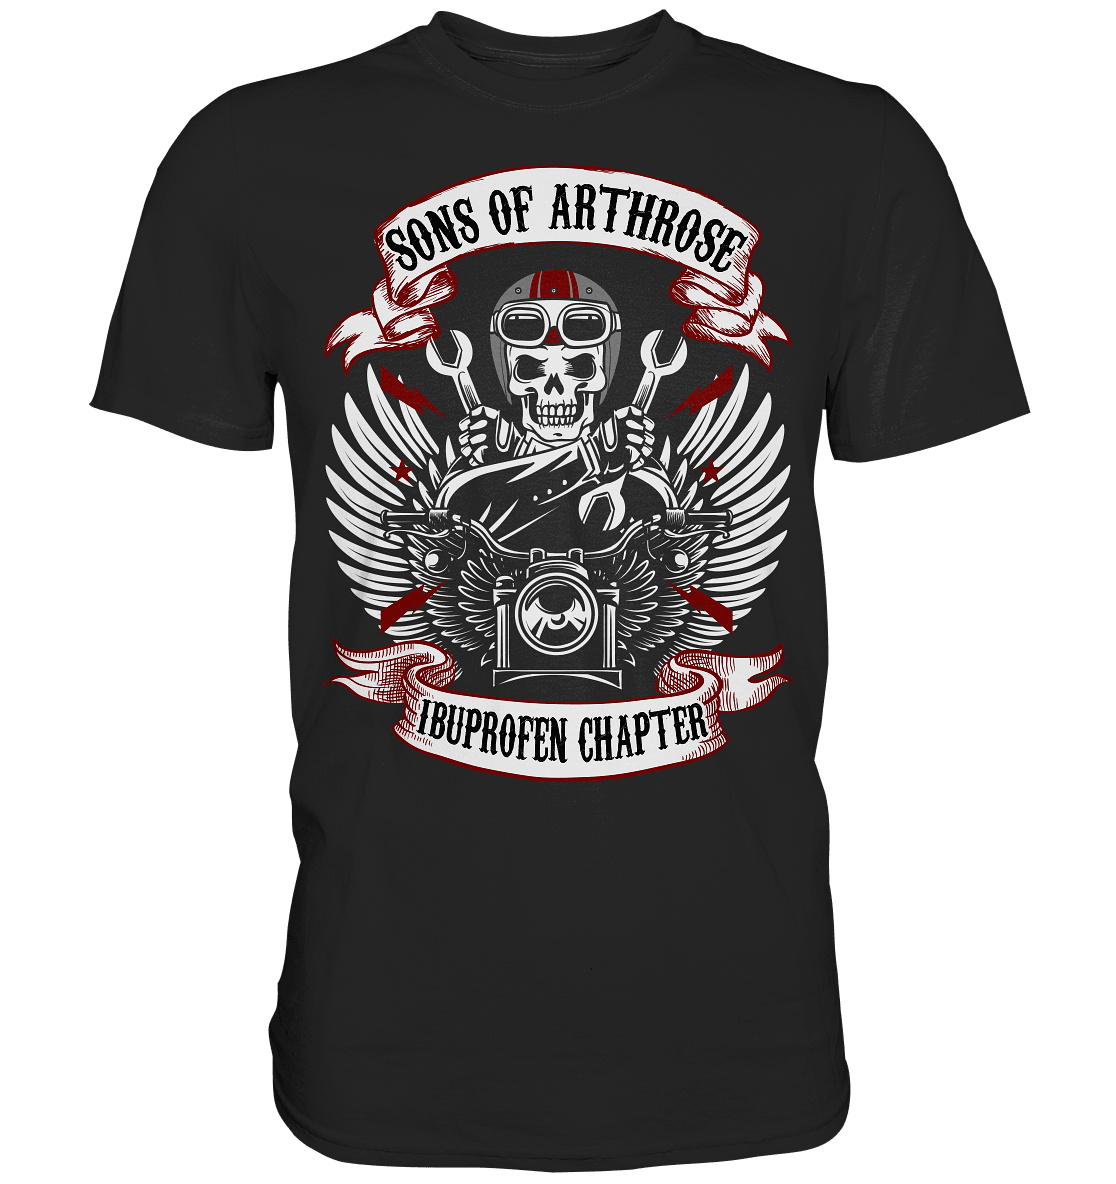 Sons of Arthrose - Shirt - Totally Wasted